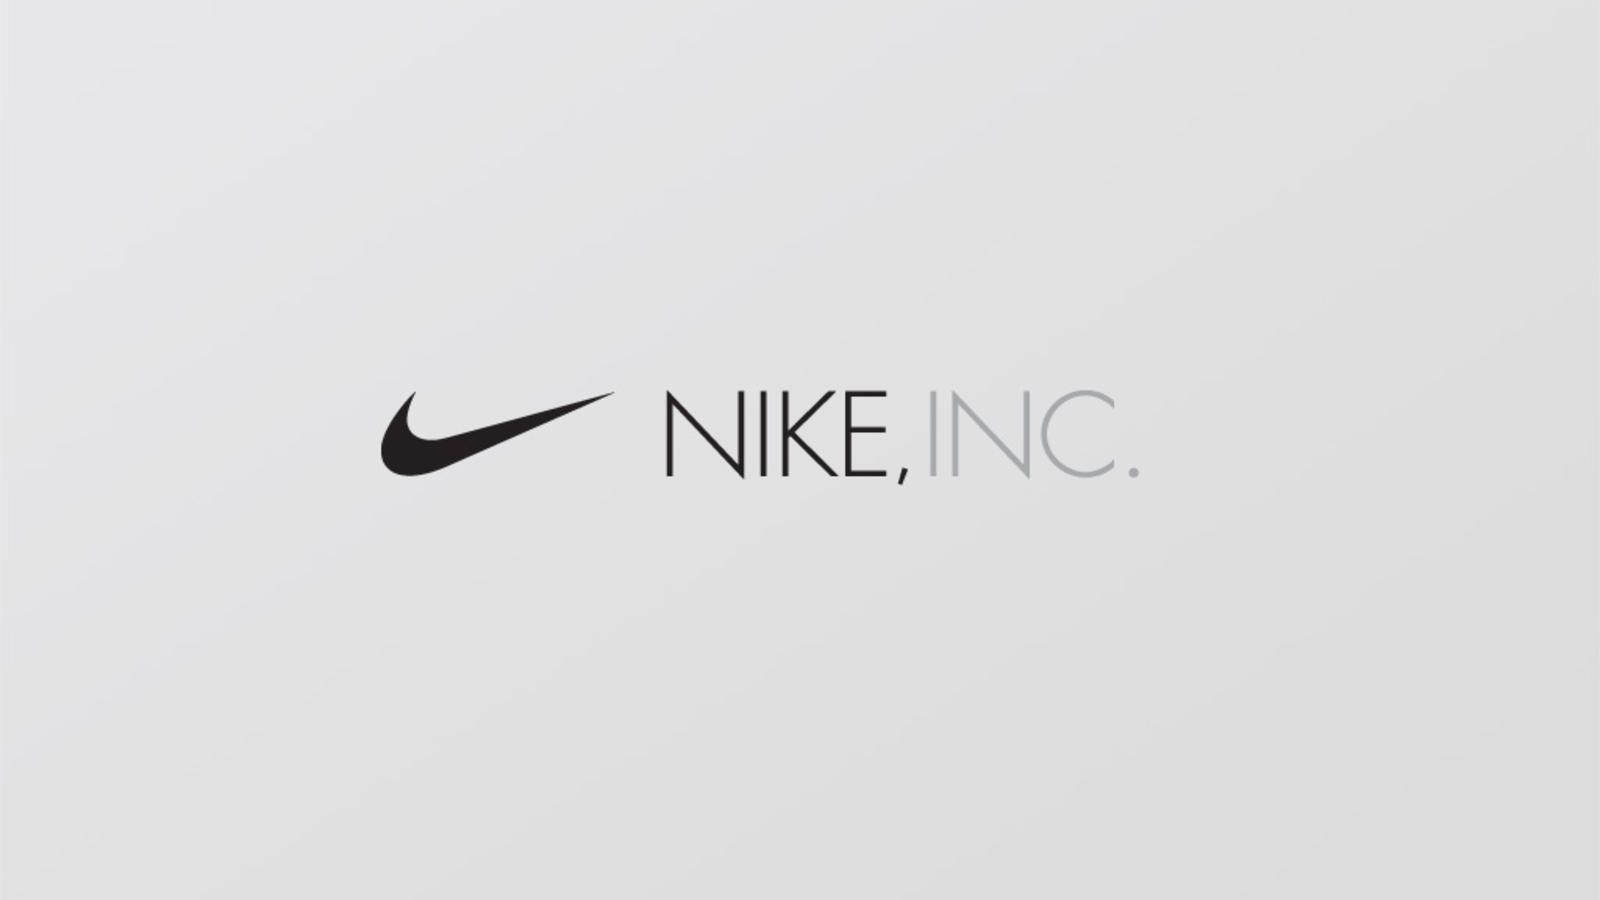 Umbro International Logo - NIKE, Inc. to Divest of Cole Haan and Umbro